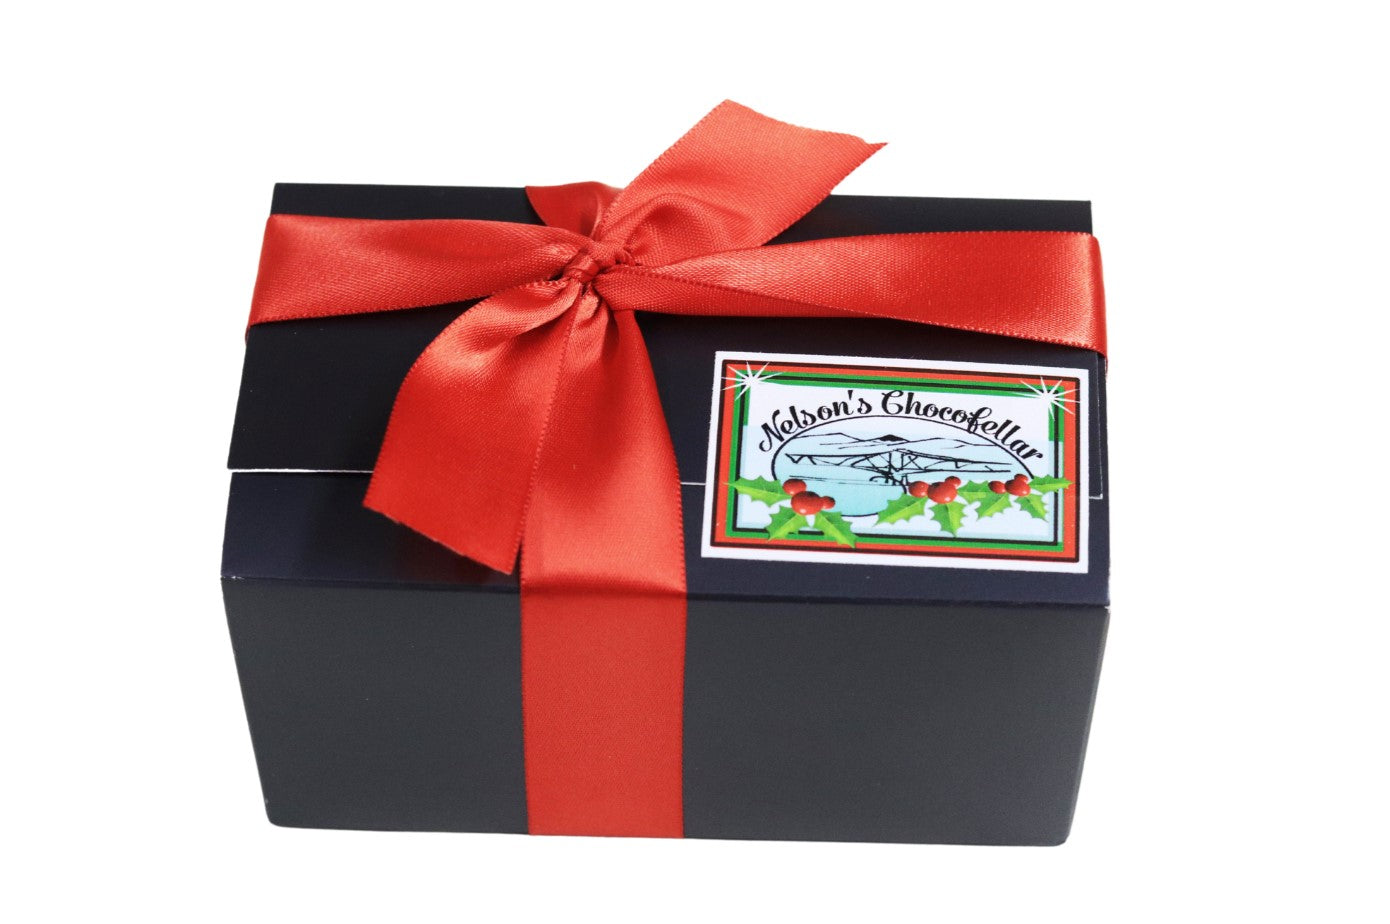 Shop All Gift Boxes